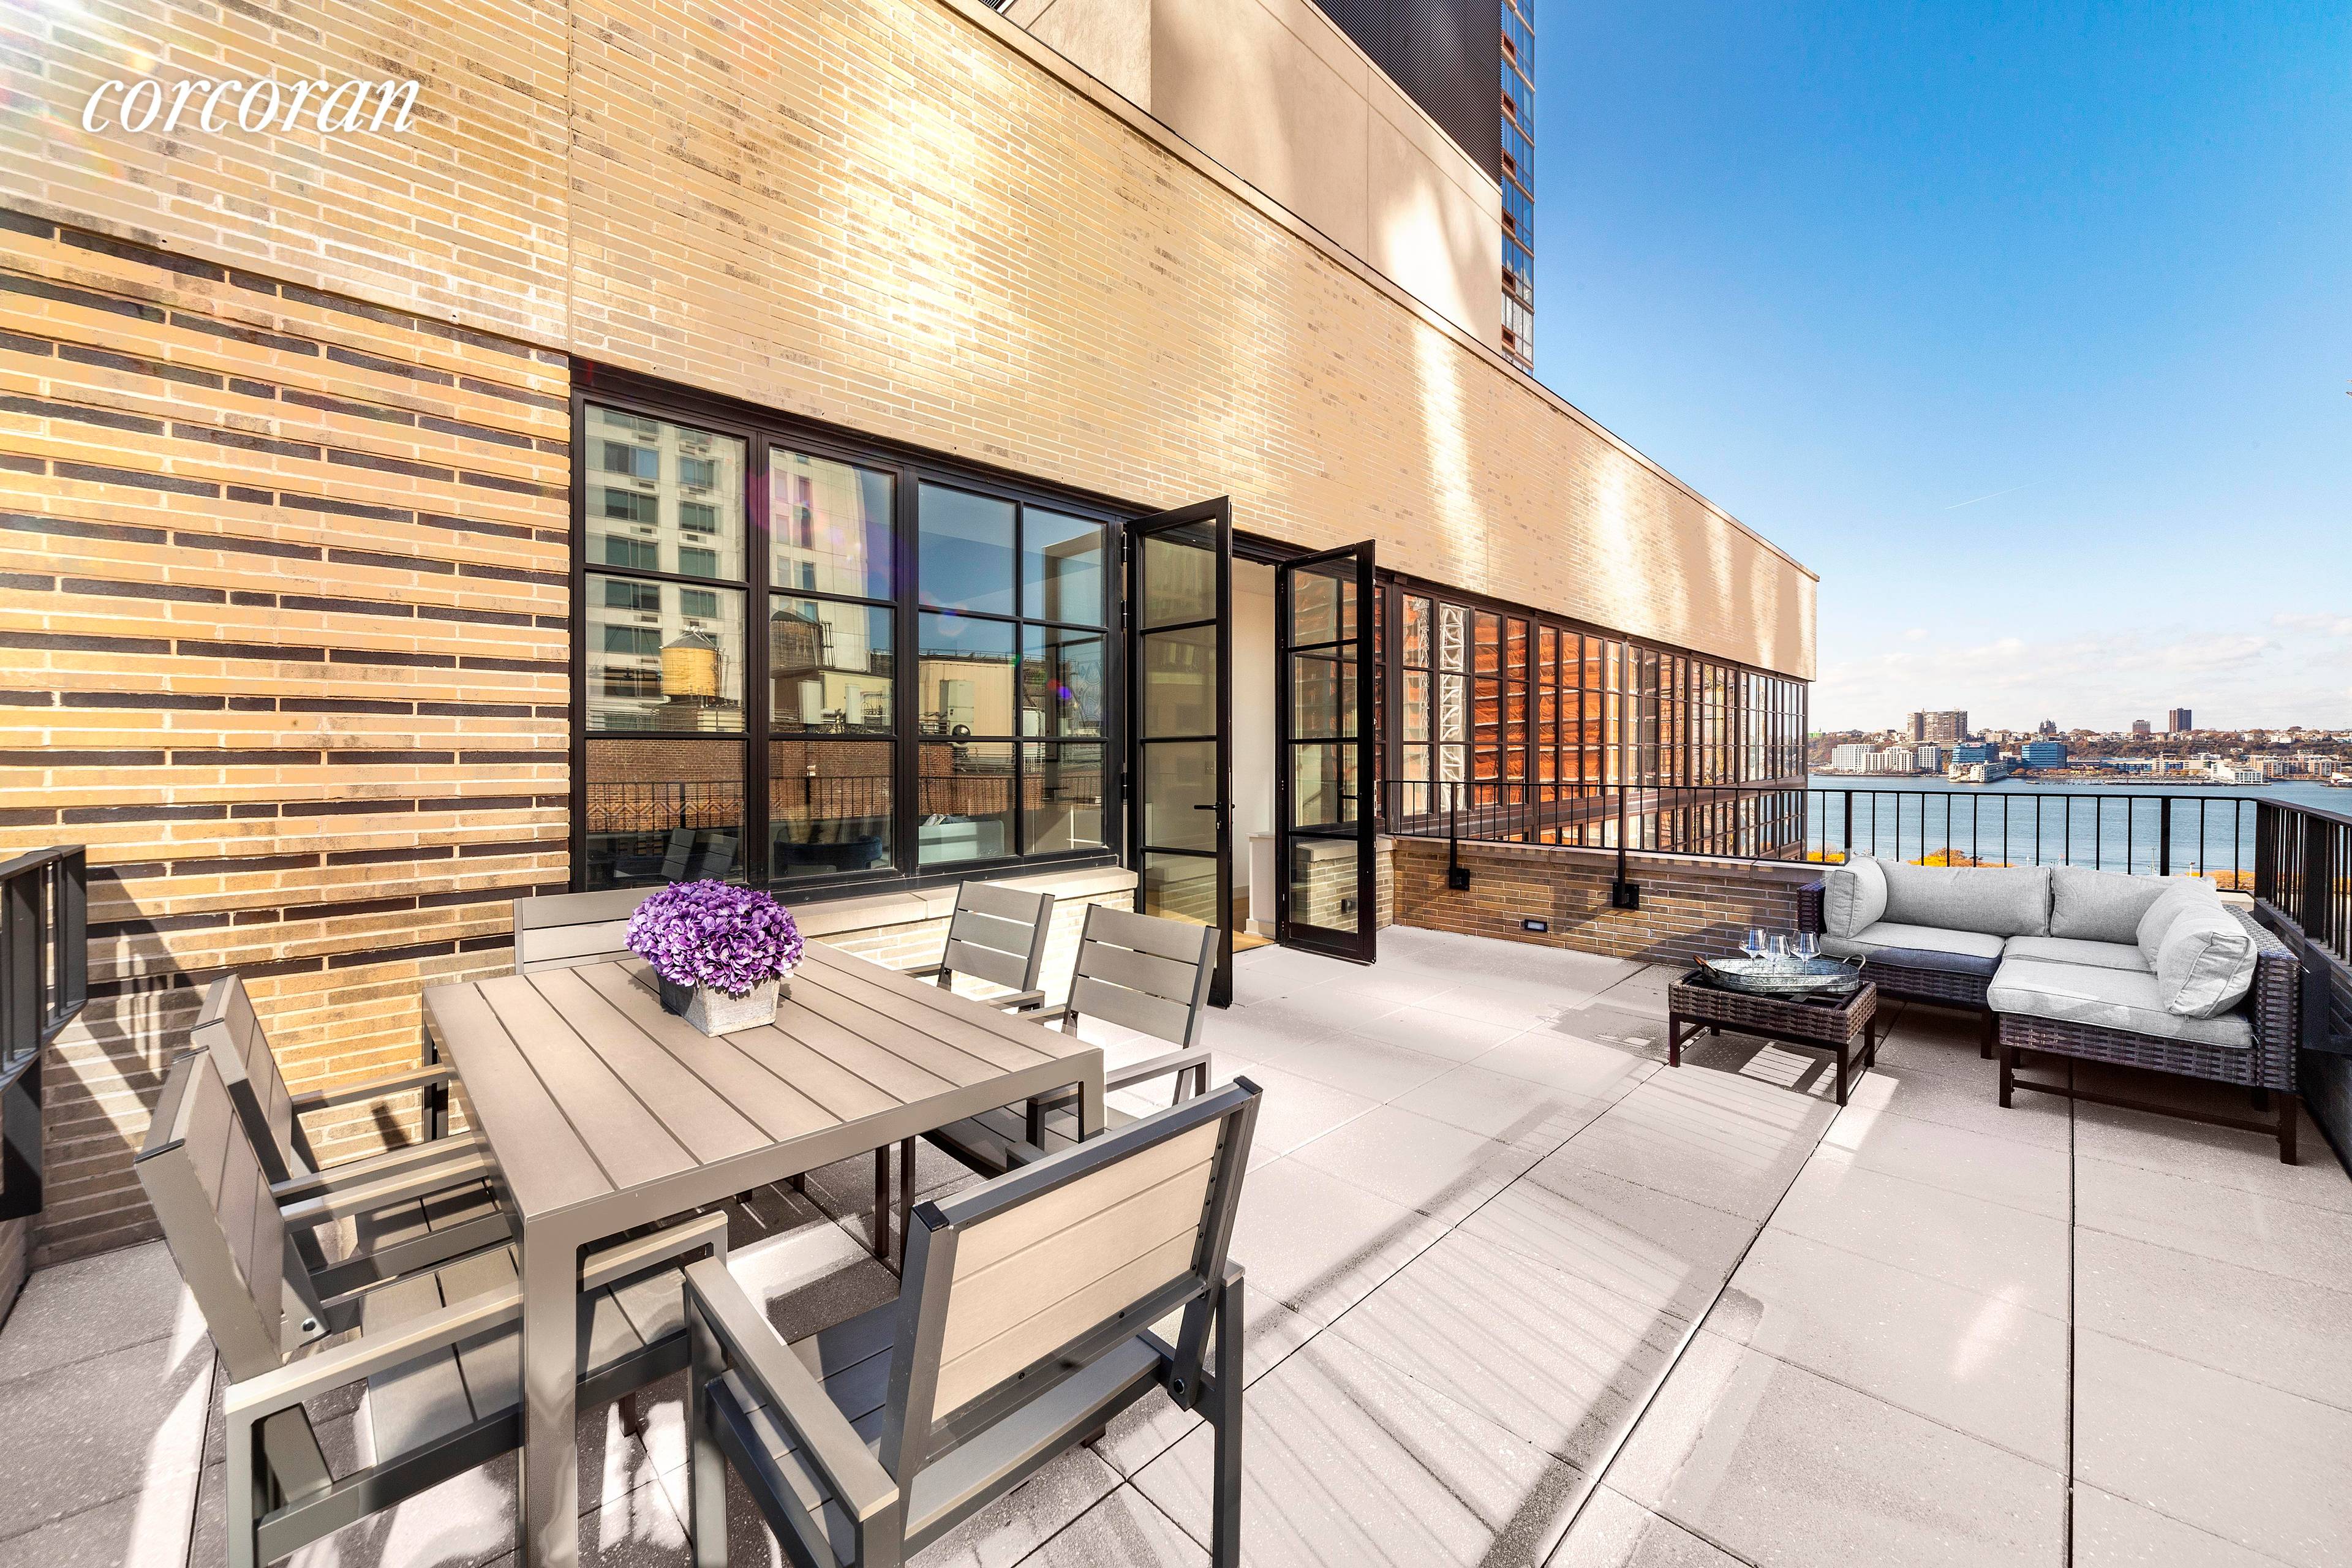 IMMEDIATE OCCUPANCY Introducing Five Five Zero, a brand new West Chelsea condominium located between the High Line and the Hudson River.